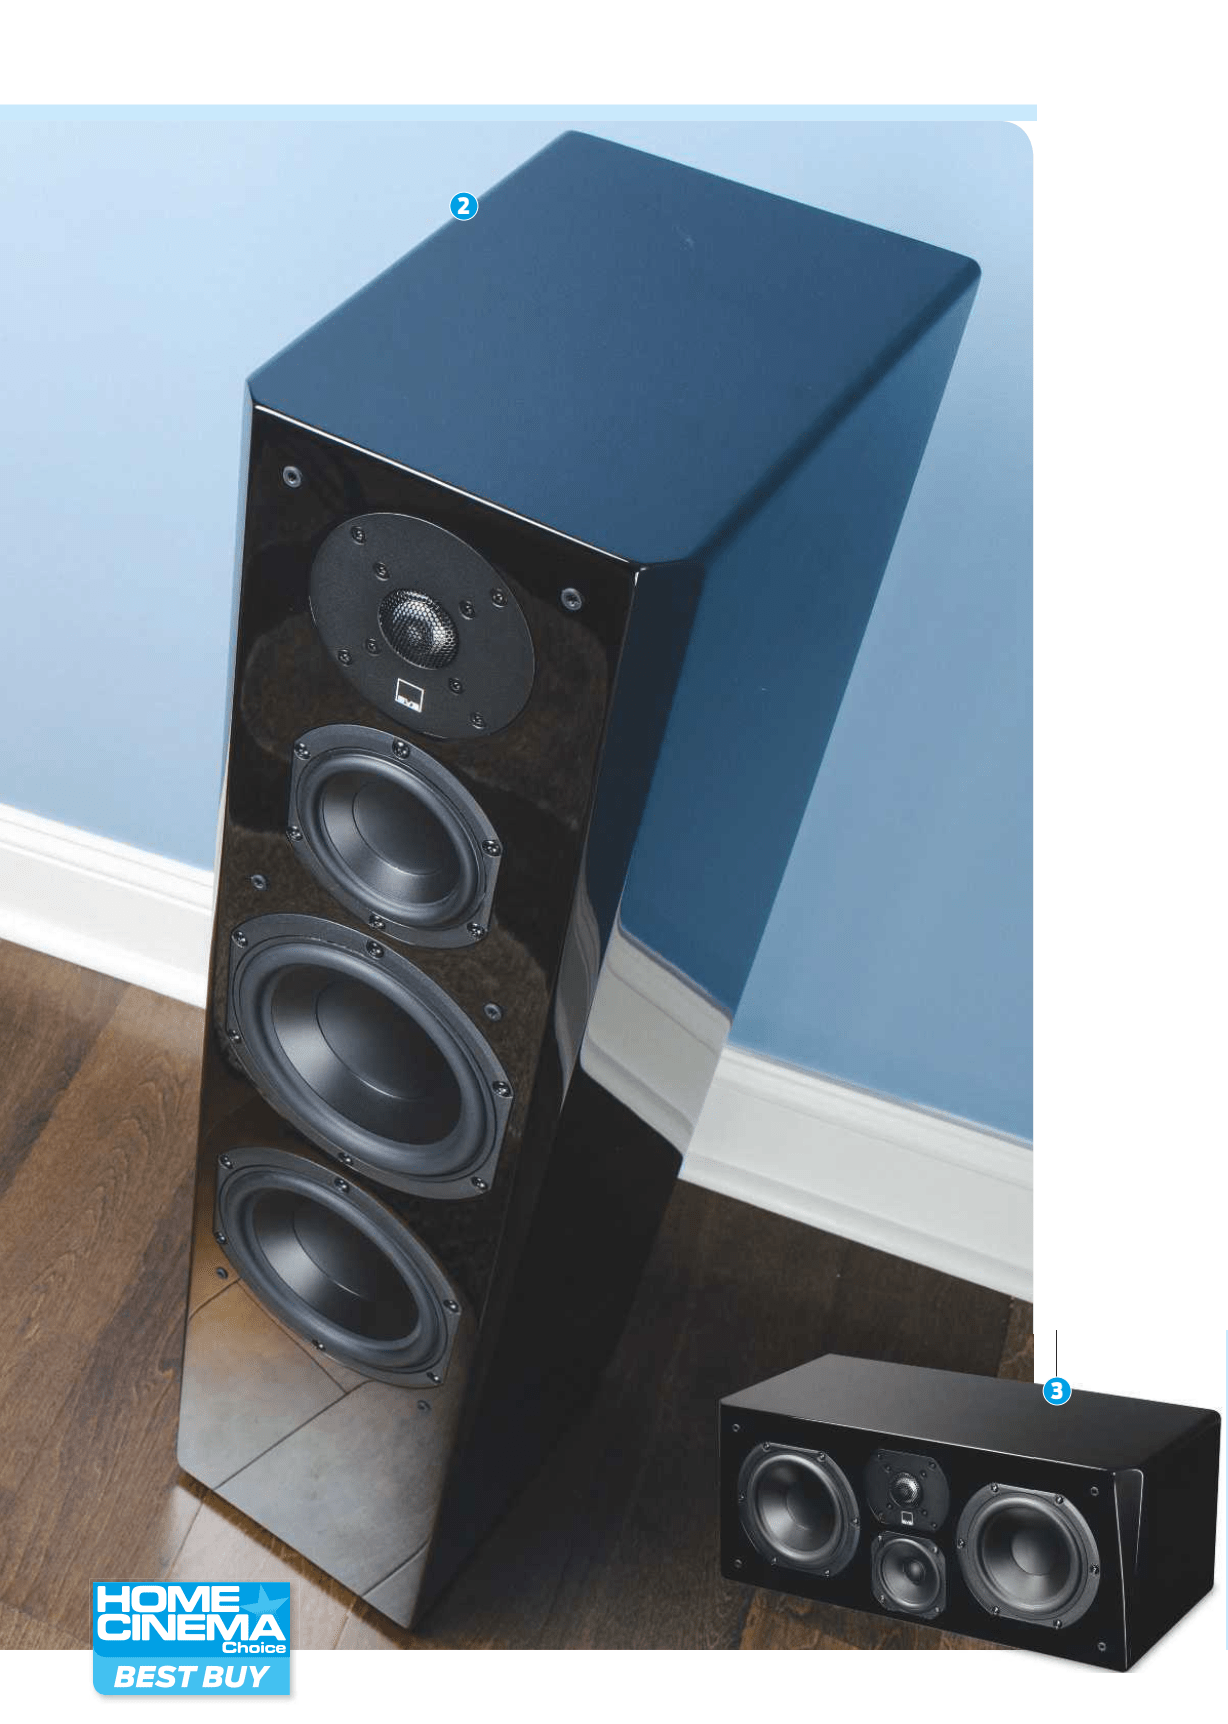 SVS PRIME TOWER 5.1.2 Review – 5.1.2 system ready for Prime time